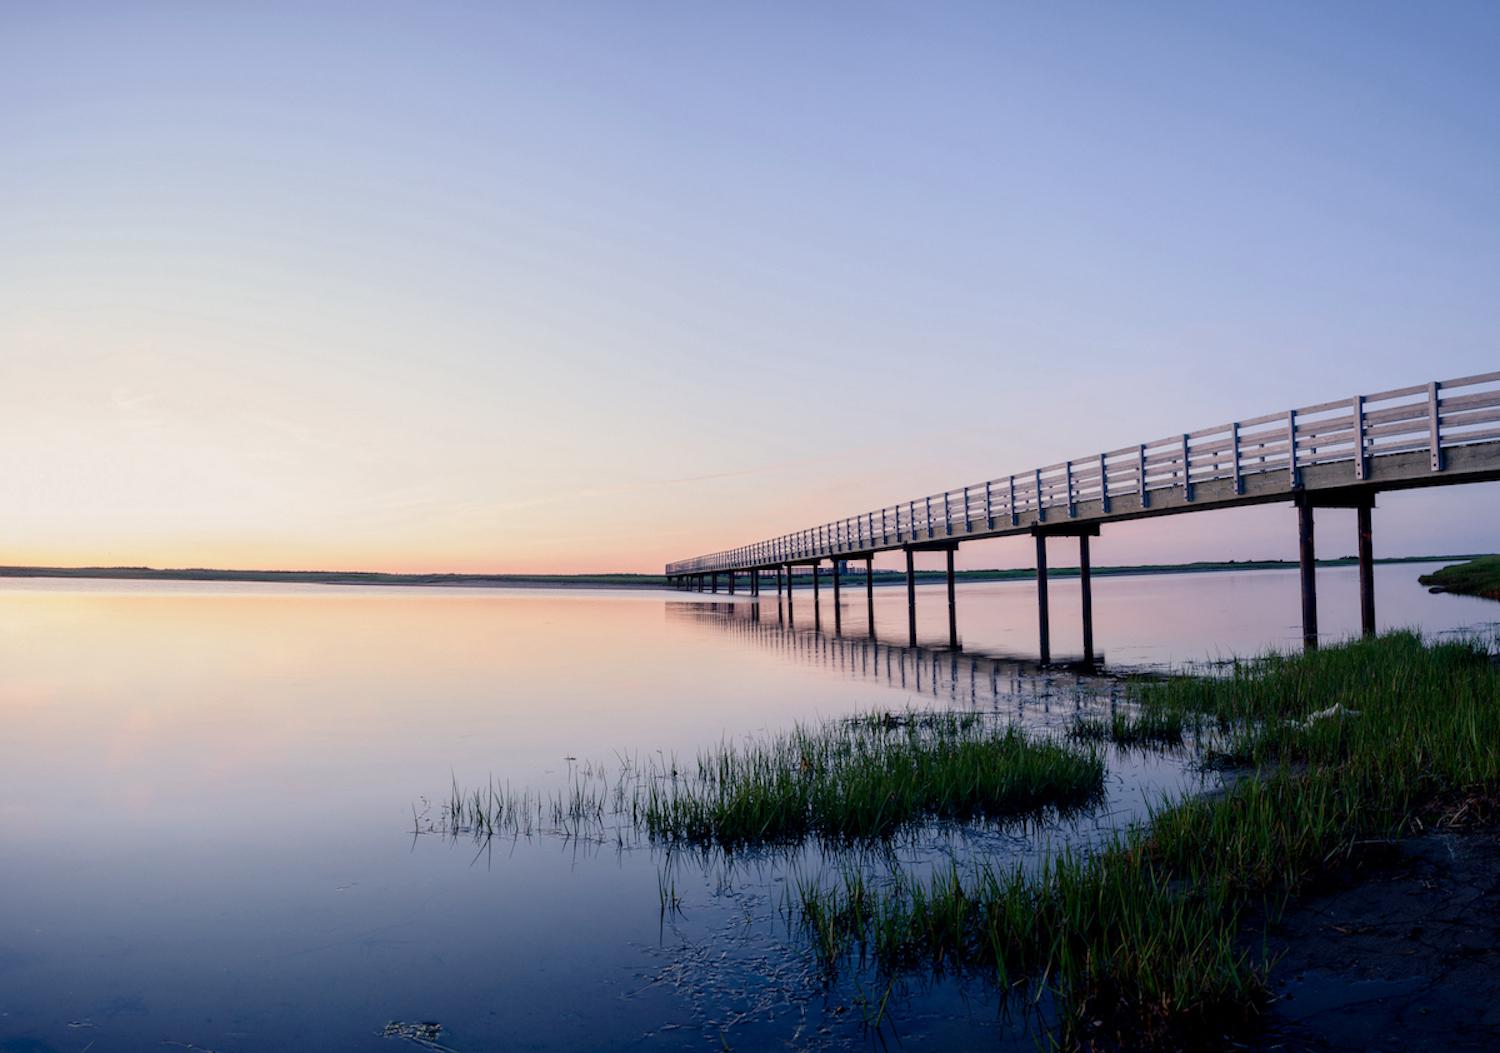 The lengthy boardwalk to Kellys Beach is one of the iconic features of Kouchibouguac.